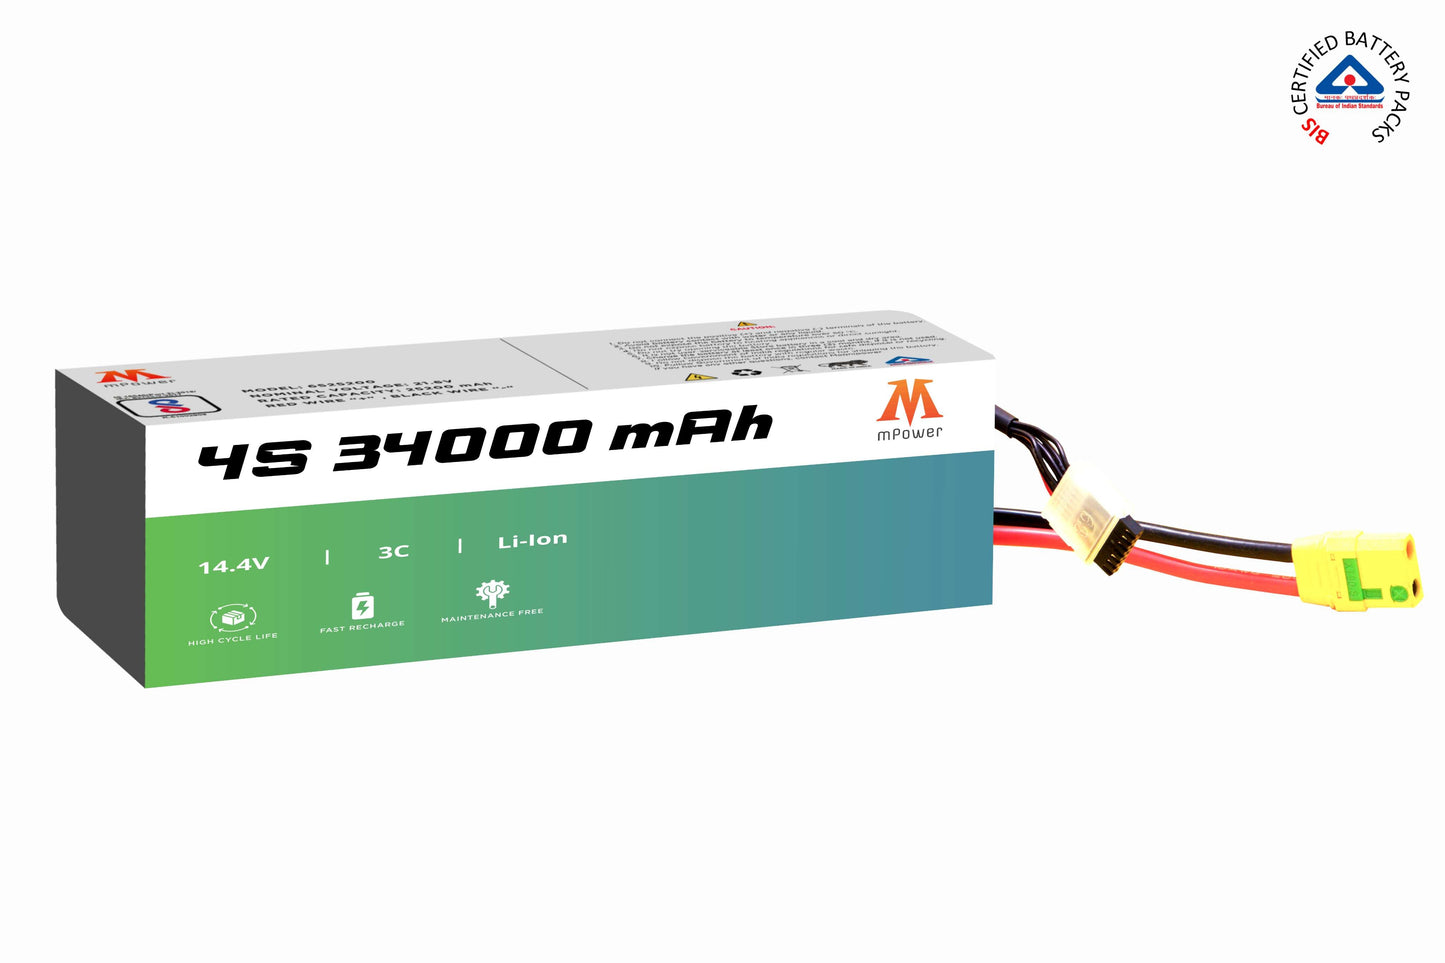 mPower 4S 34000mAh Lithium-Ion Battery for Surveillance Drones